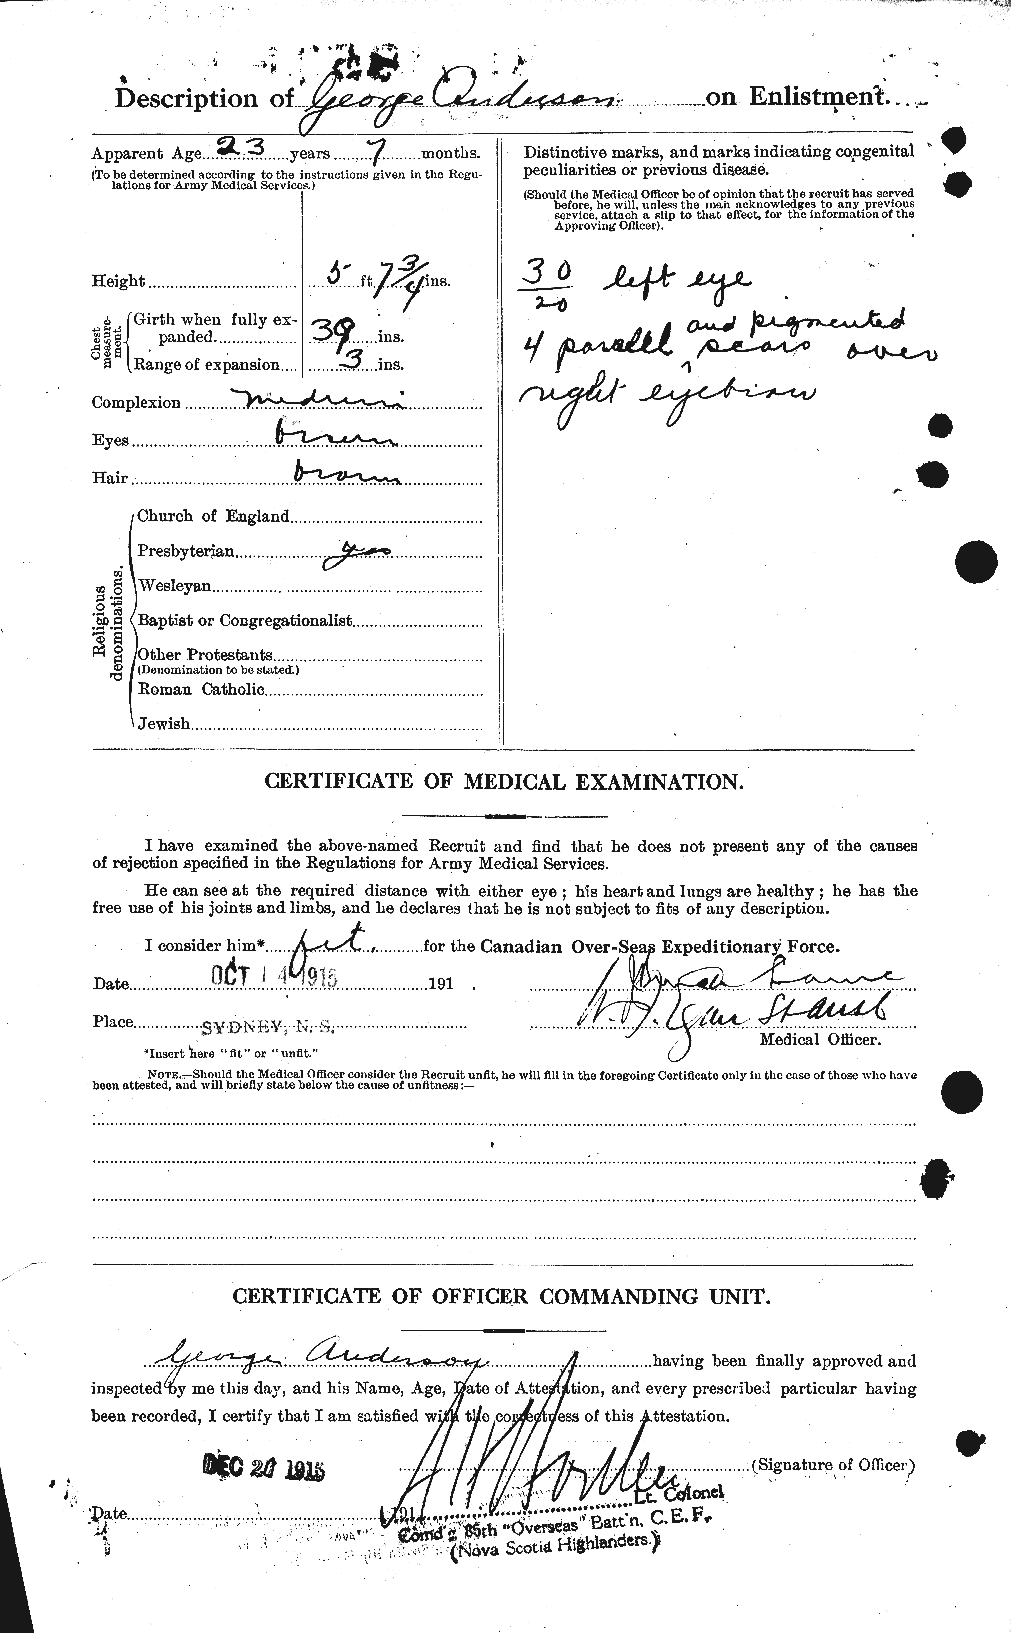 Personnel Records of the First World War - CEF 209788b